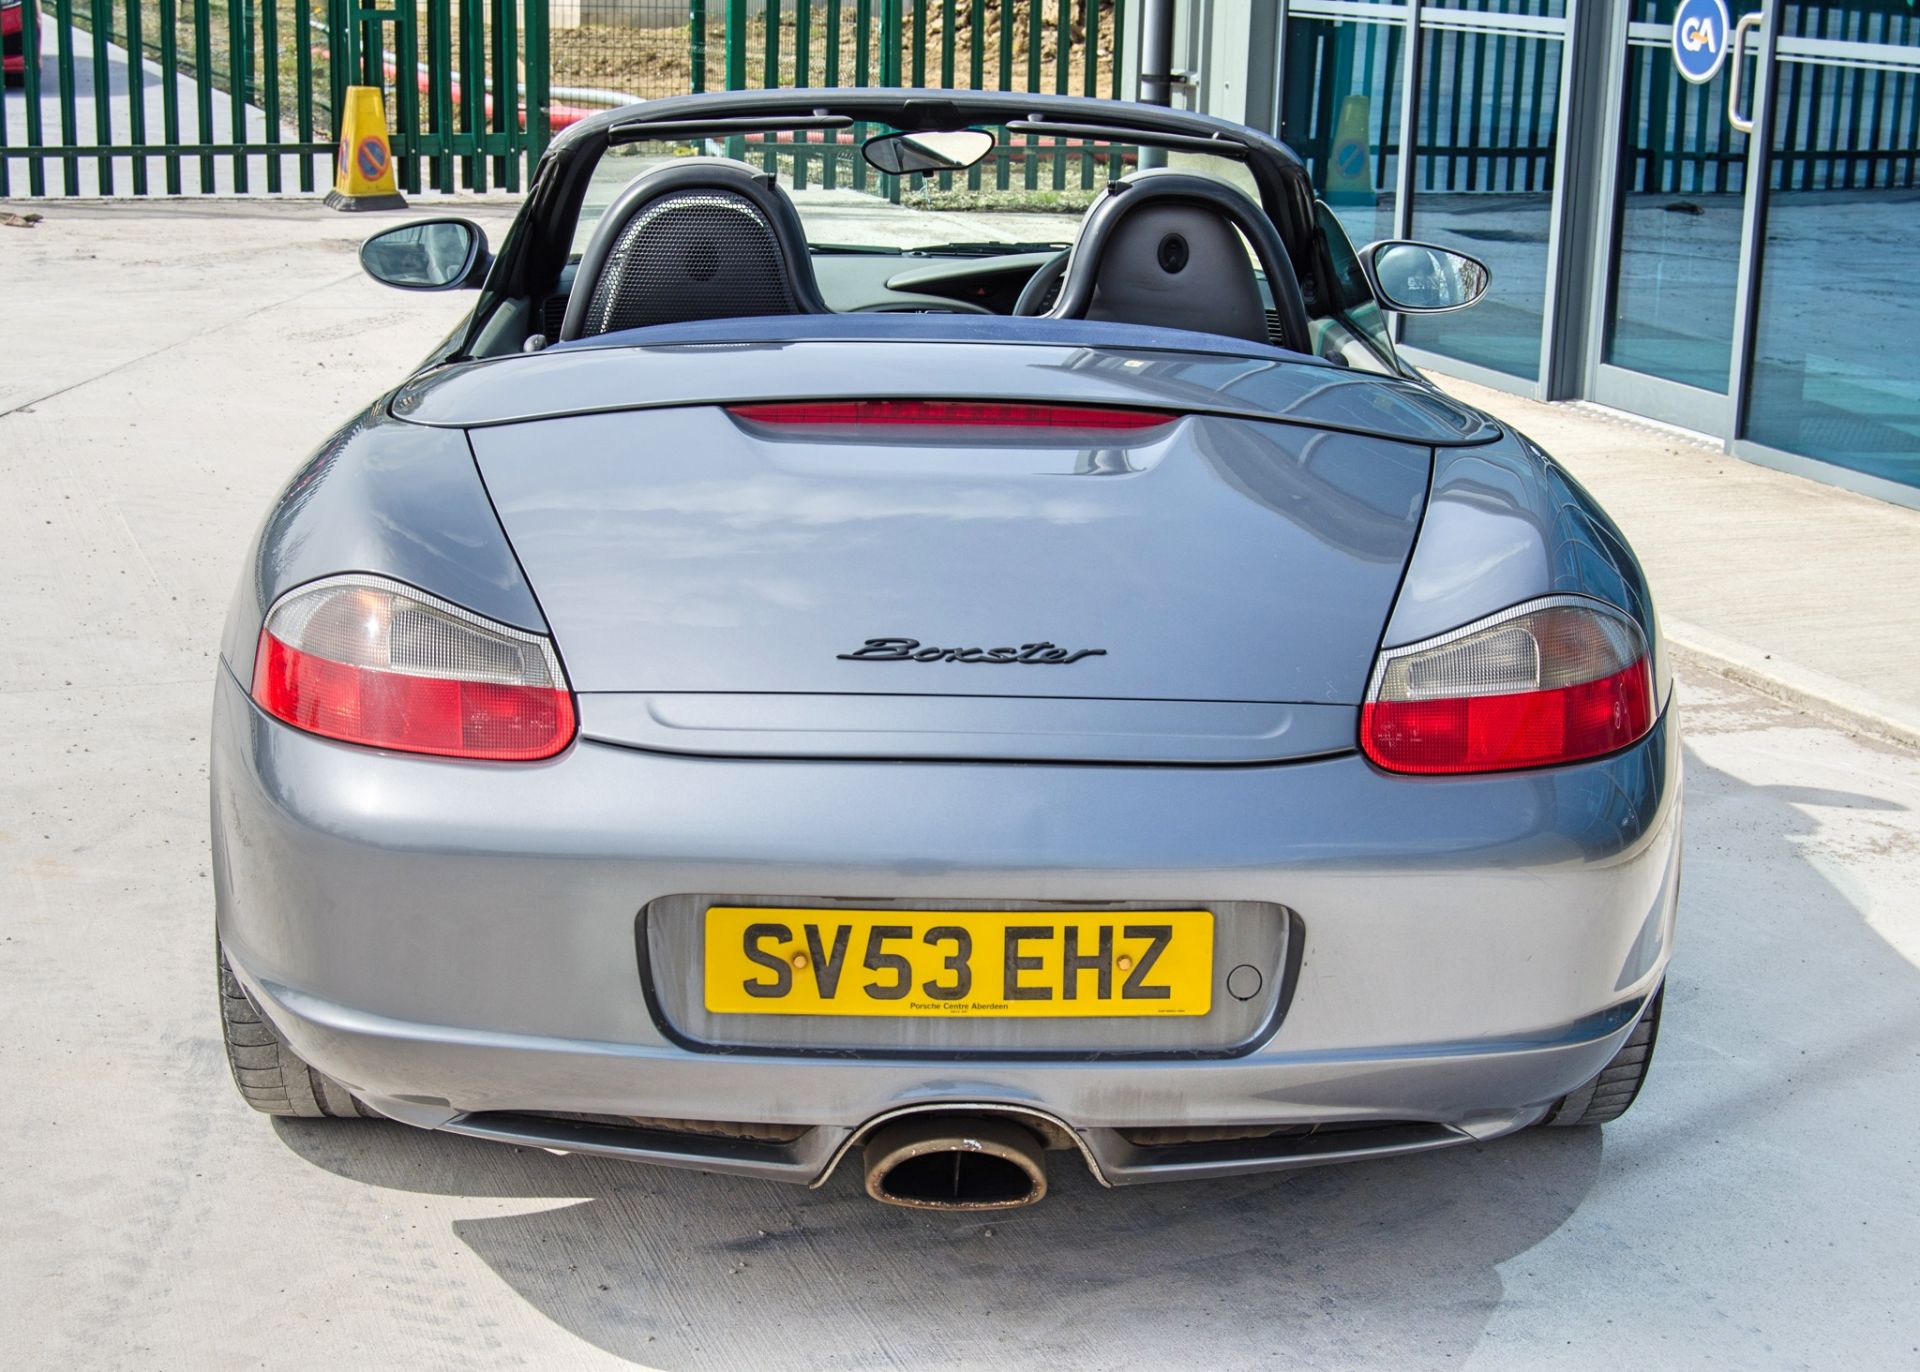 2003 Porsche Boxster 2.7 5 speed manual convertible roadster - Image 12 of 50